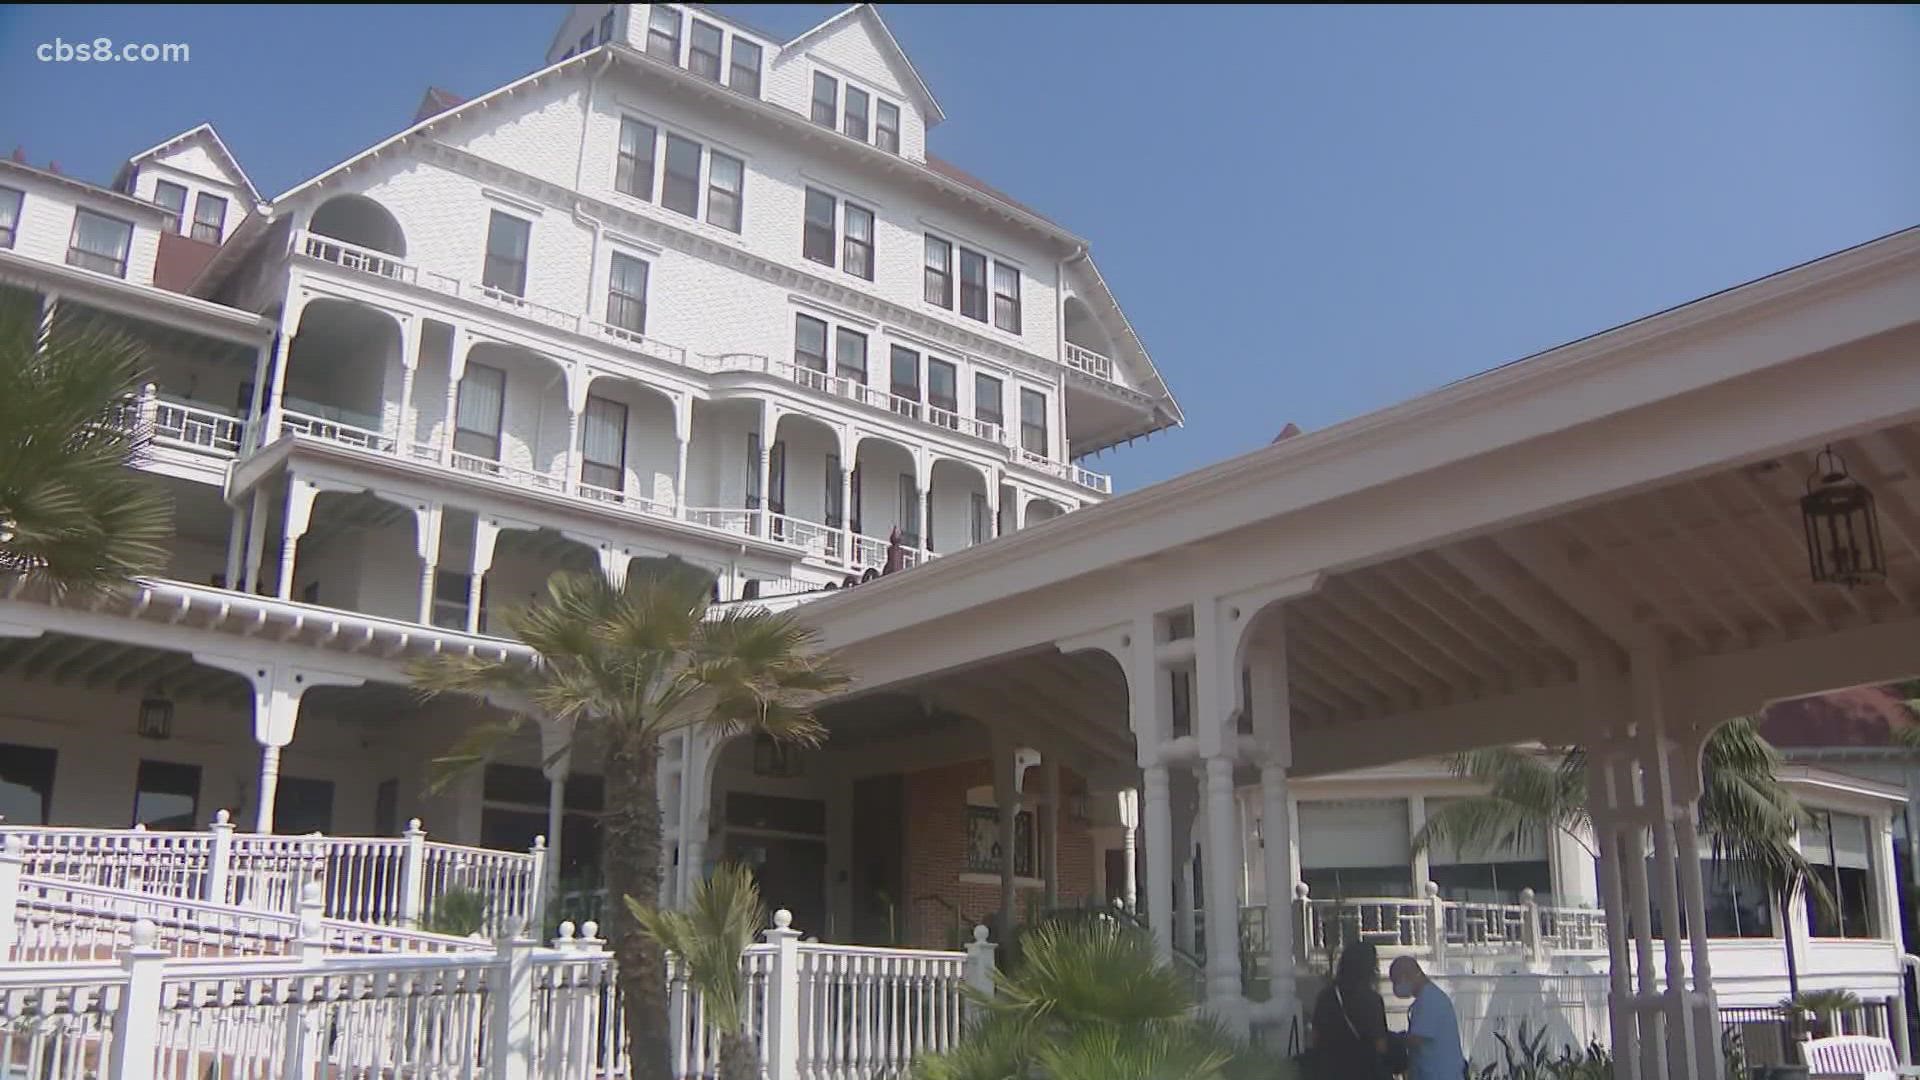 The hotel, built in 1888, just finished up a three-year, $450-million renovation project.